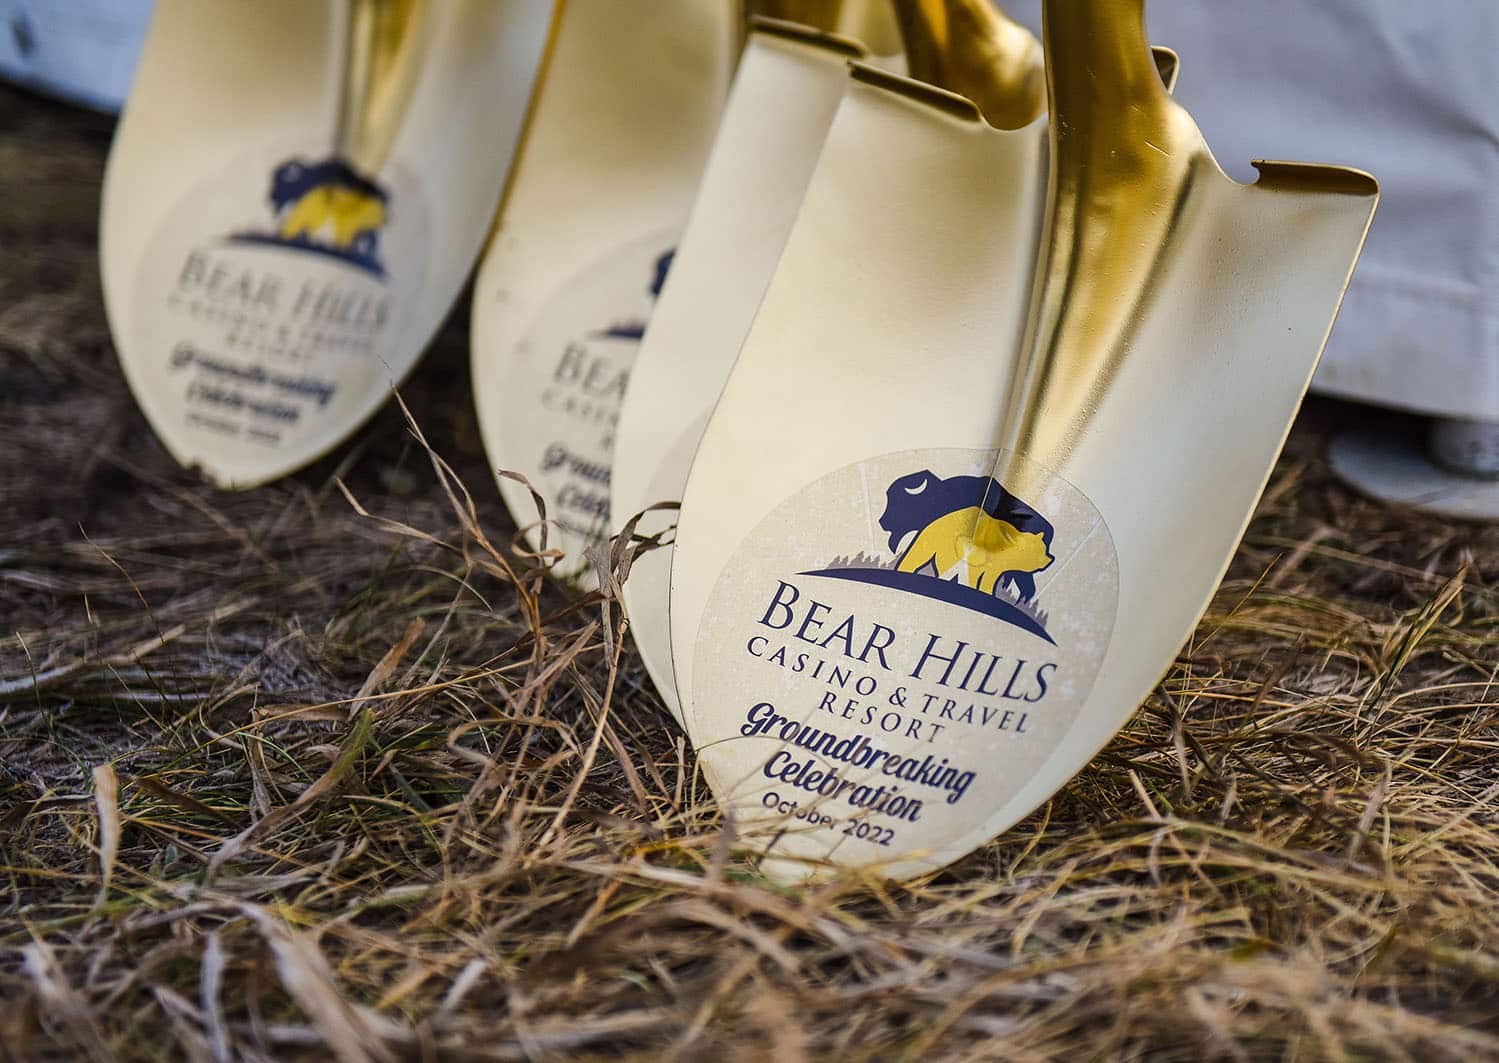 Gold shovels sitting on grass with the Bear Hills logo and text that reads "Groundbreaking Celebration October 2022"